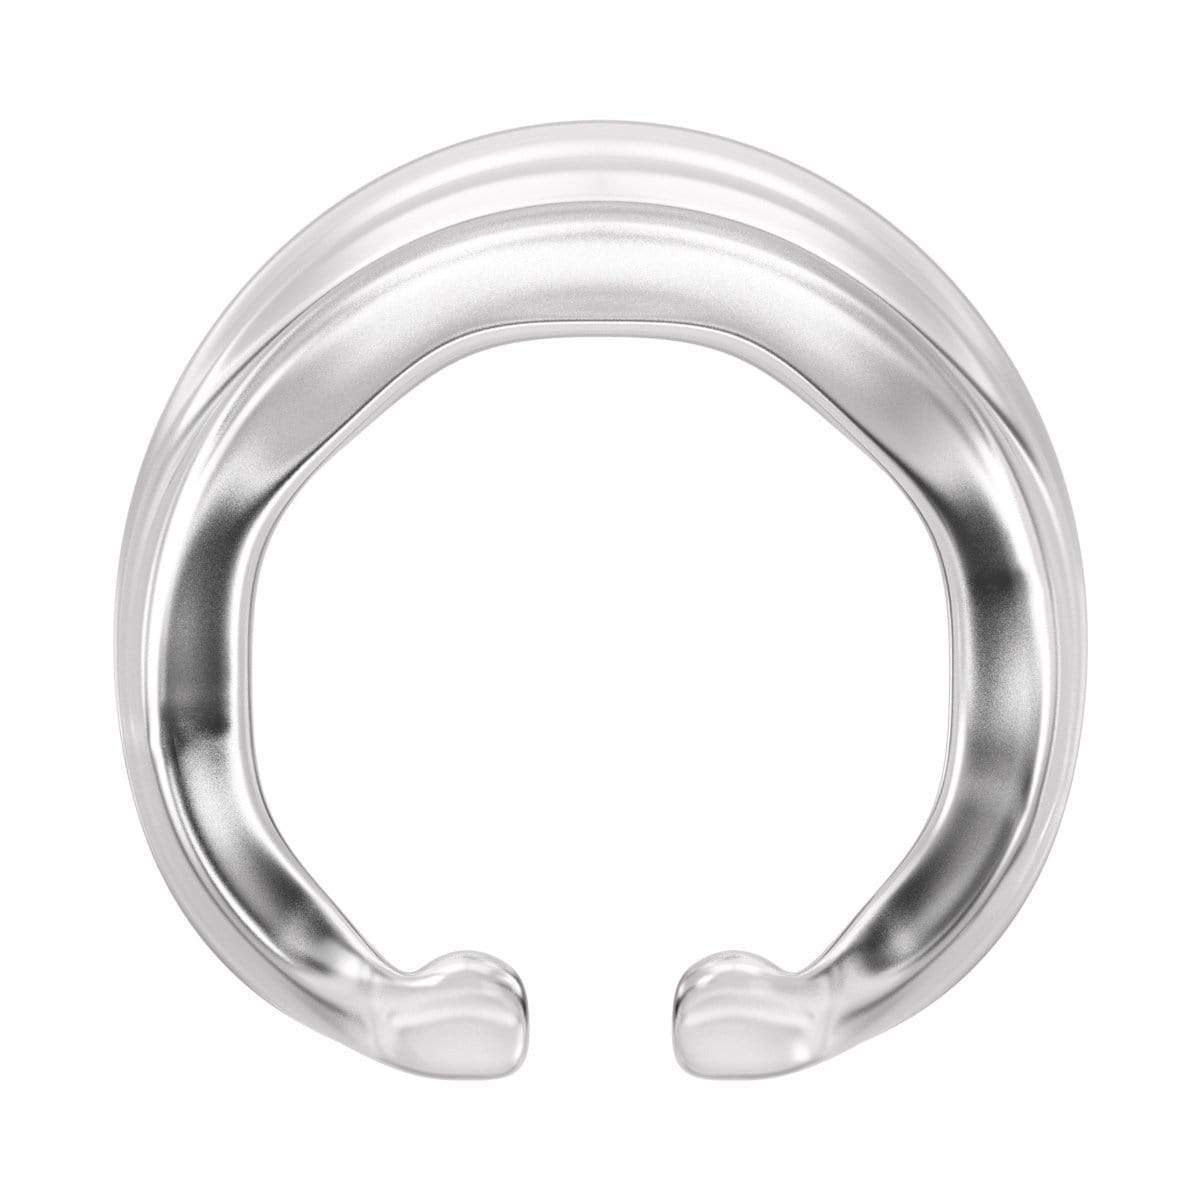 SSI Japan - My Peace Wide Standard Day Size M Correction Cock Ring (Clear) -  Cock Ring (Non Vibration)  Durio.sg